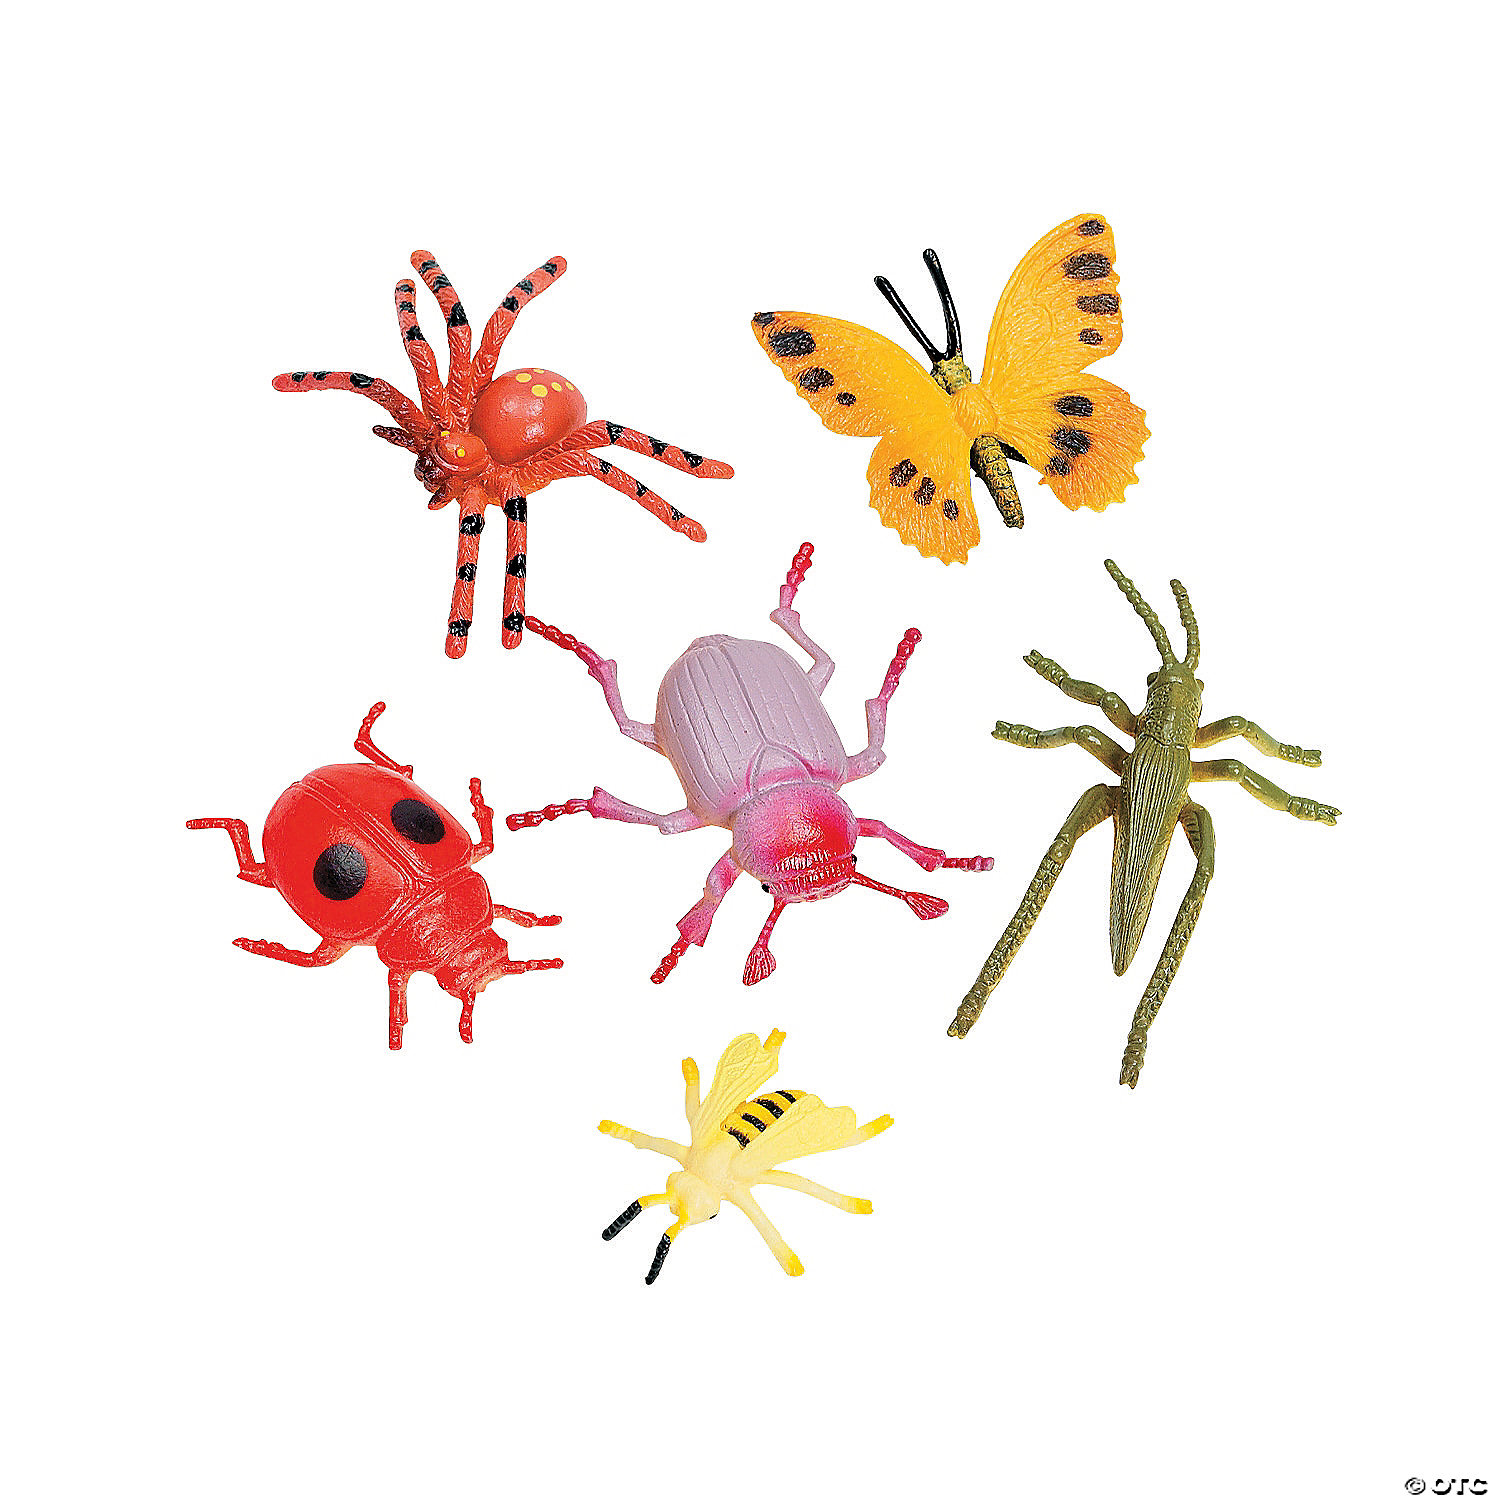 10 Assorted figure realistic bugs plastic insects kisd party bag filler toy UL 